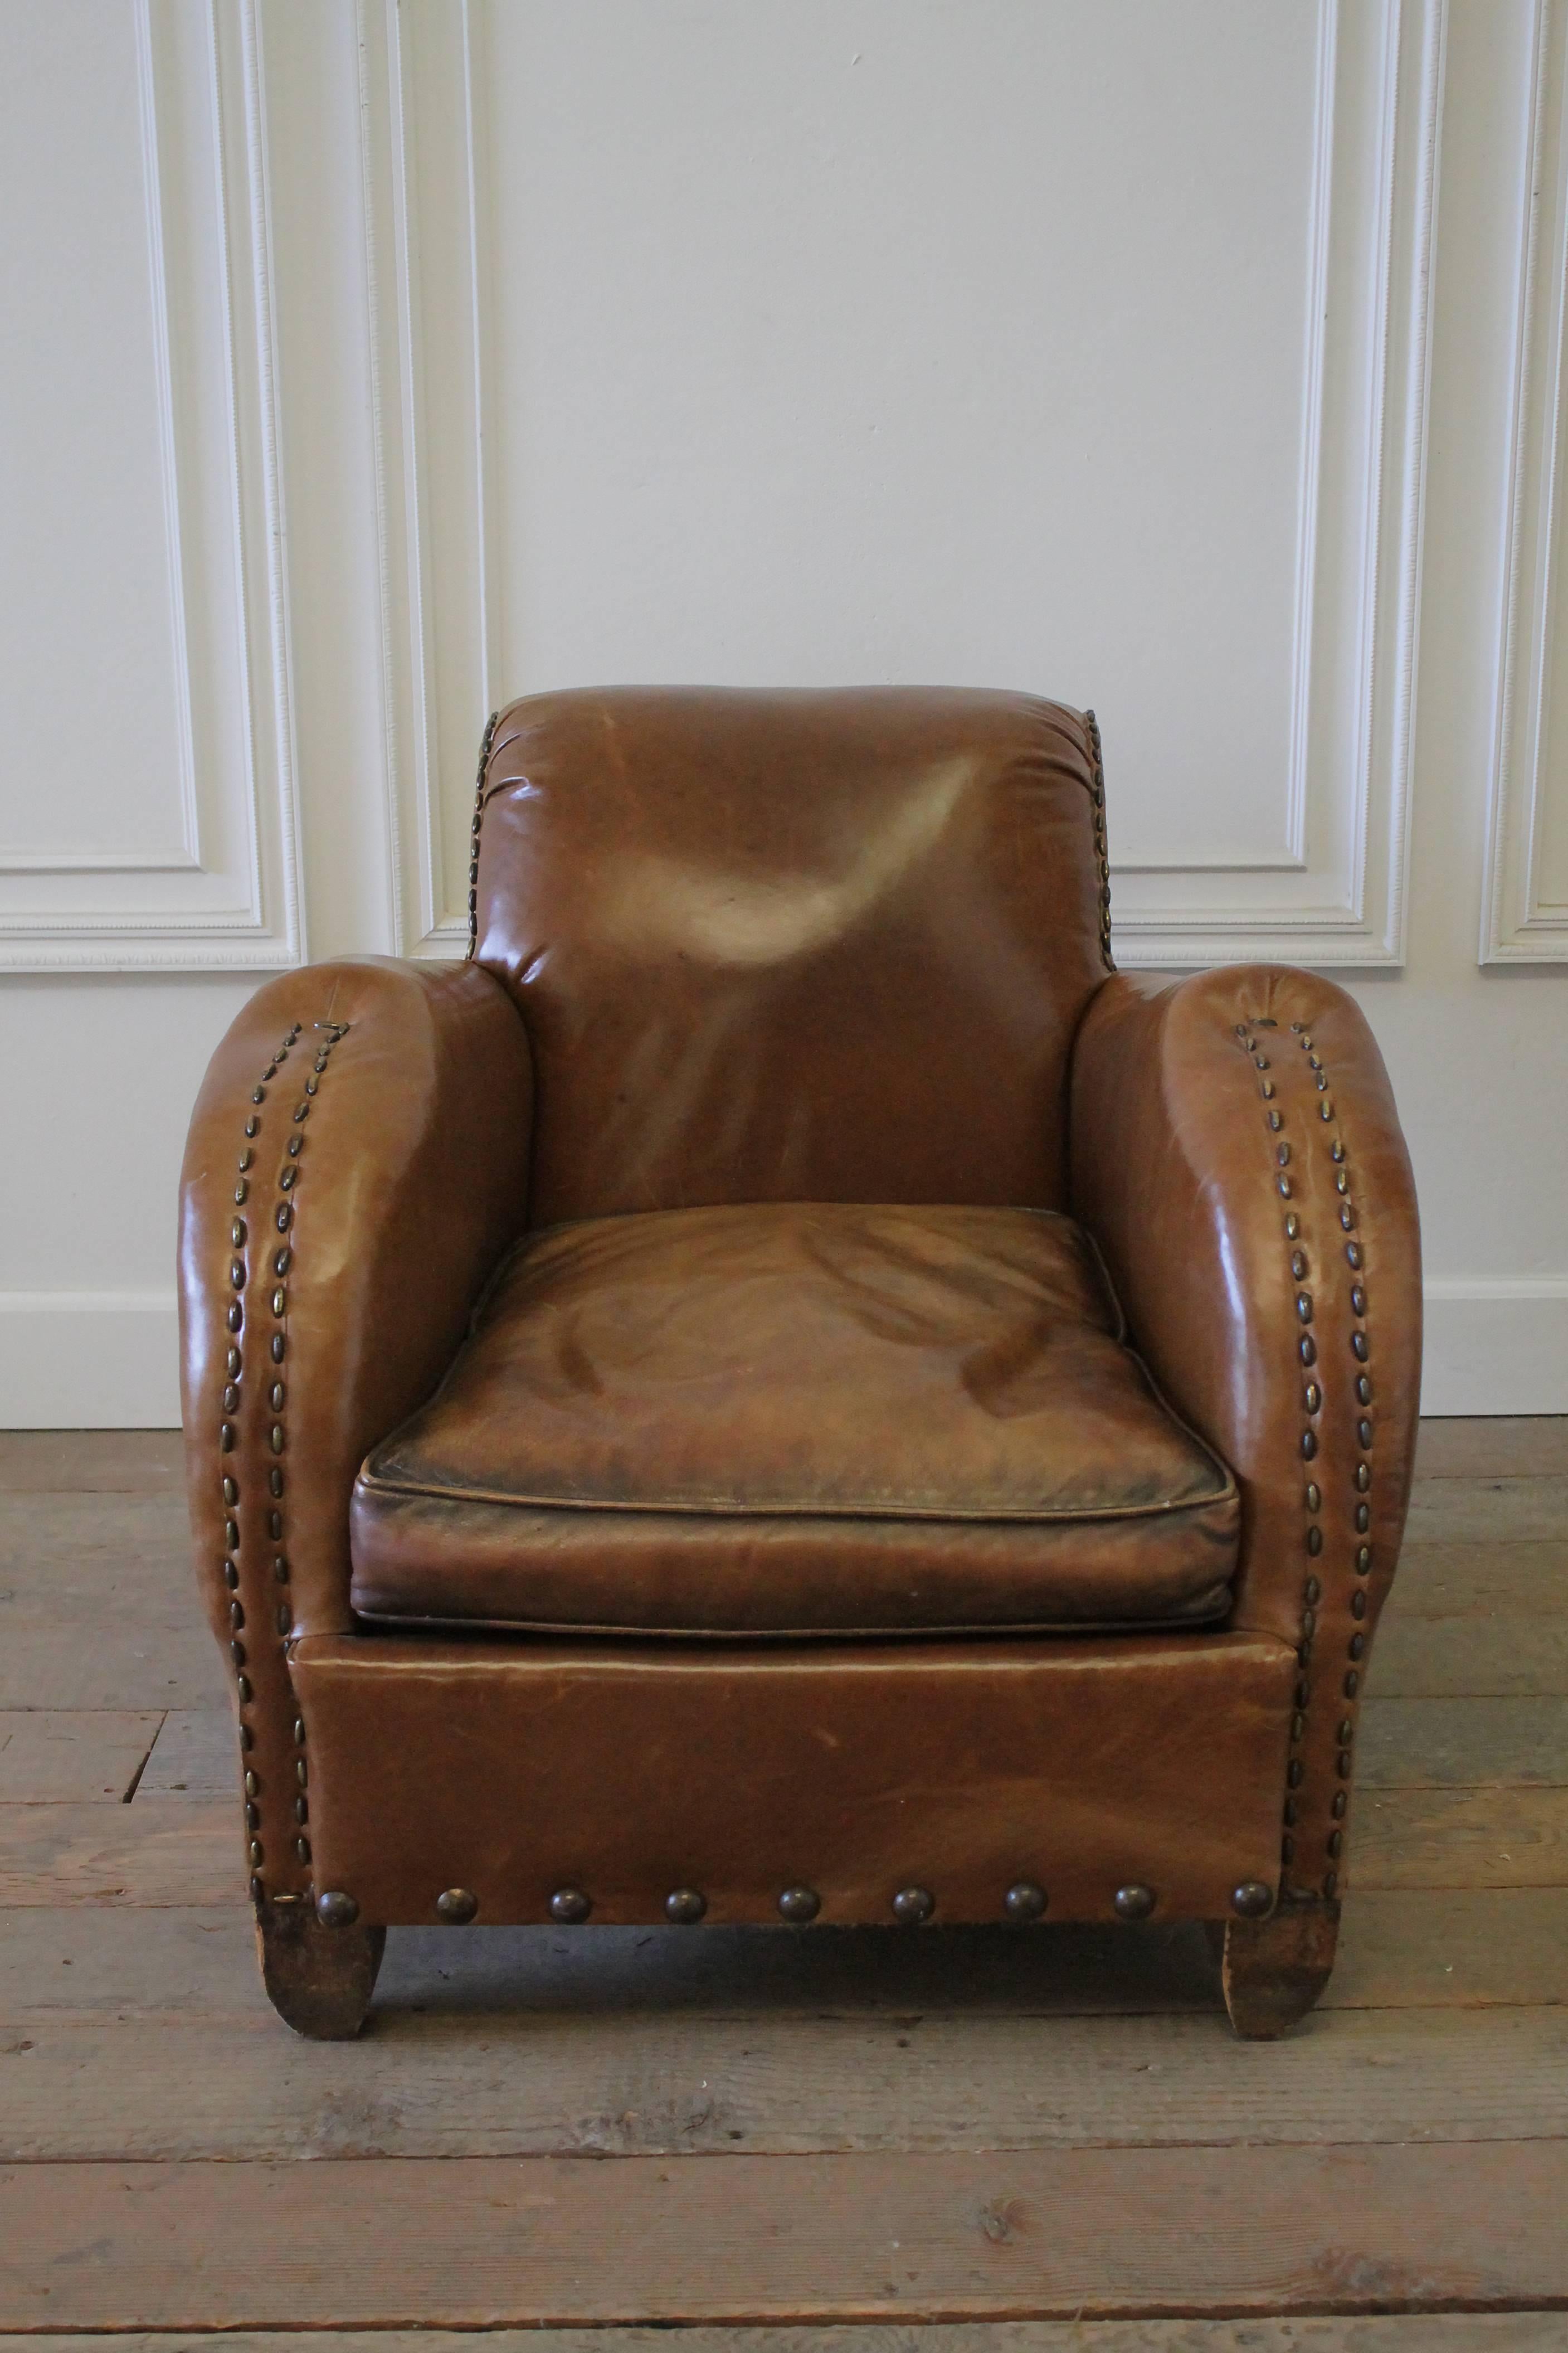 Early 20th century Art Deco style French leather club chair
Seat has feather and down stuffing. Original nailhead trim. Very comfortable.
Leather is not original, it has been redone. Vintage style leather that shows scratches and